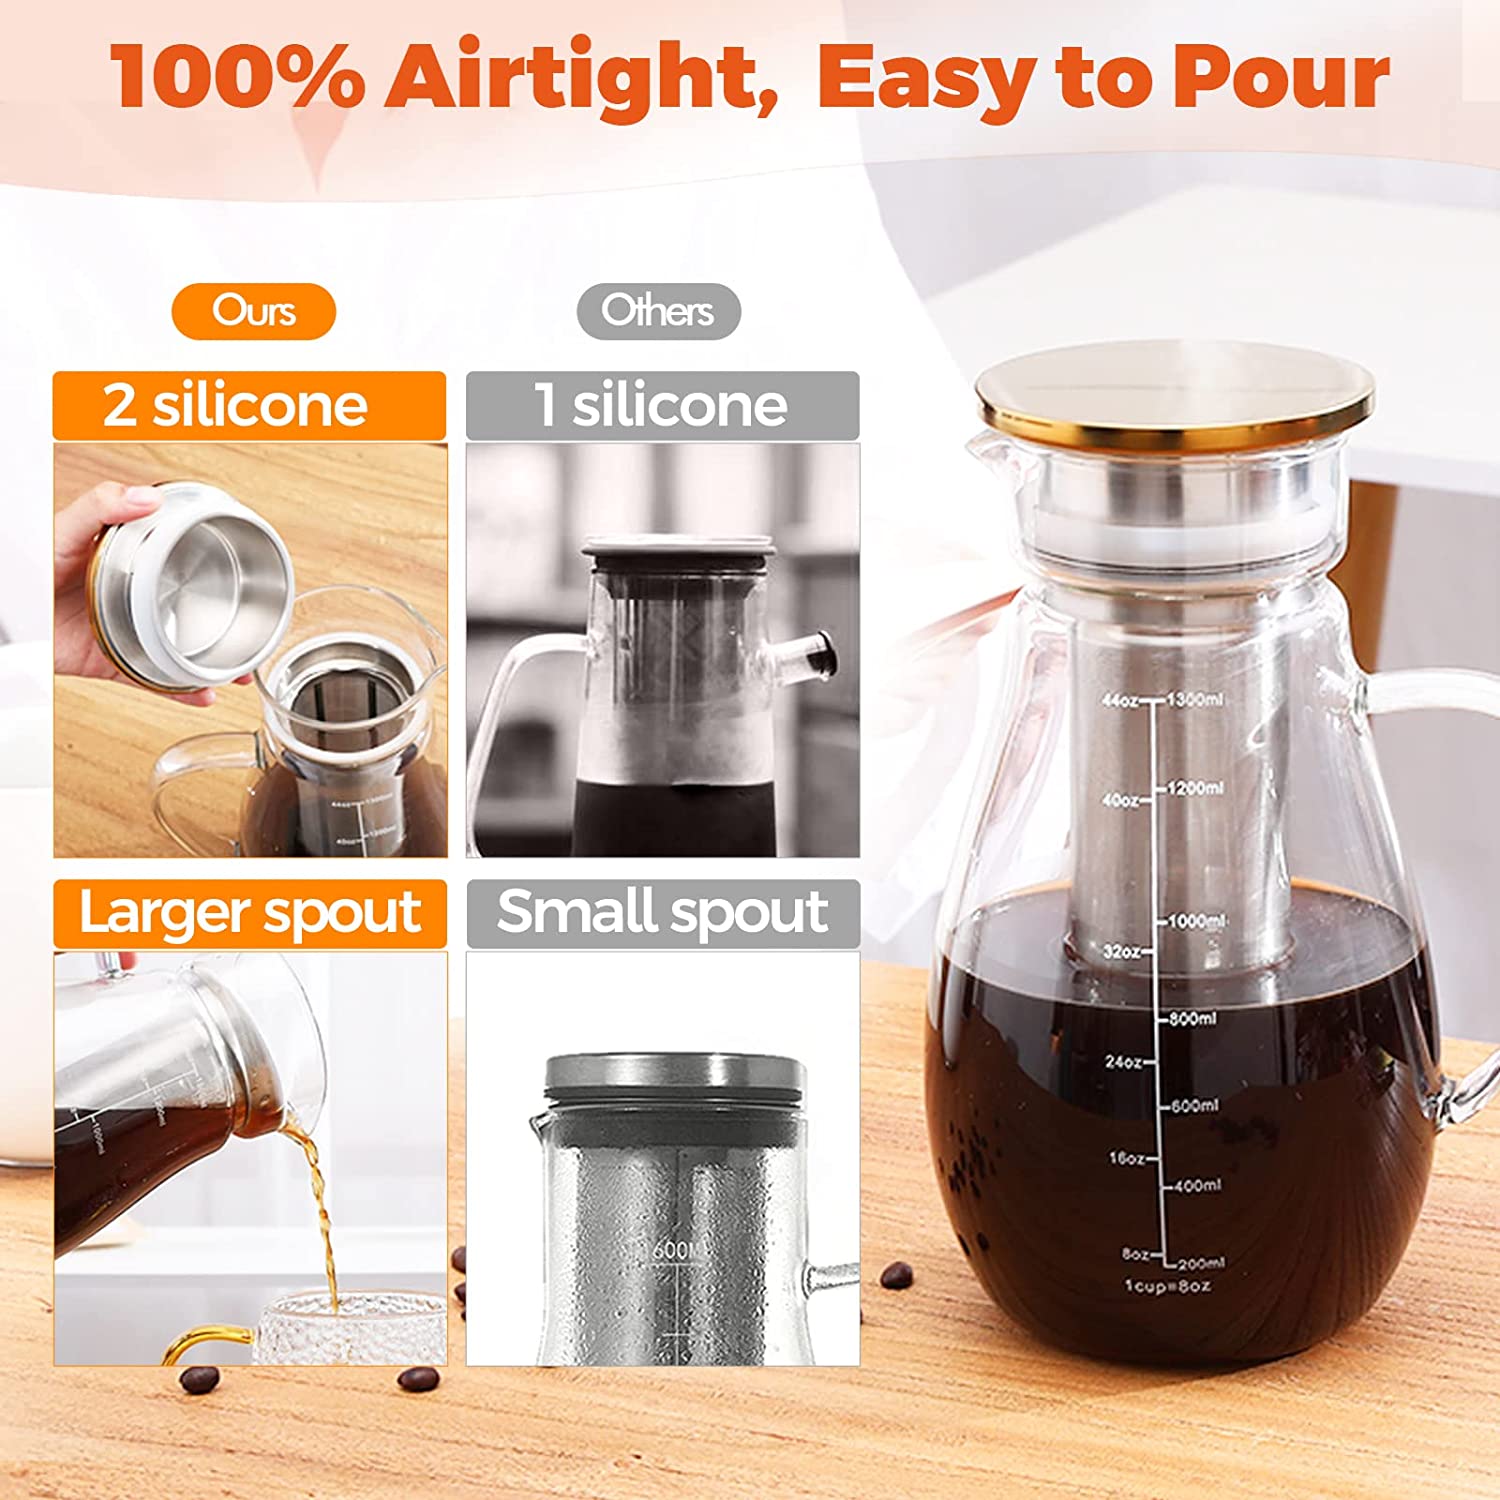 Cold Brew Coffee Infuser